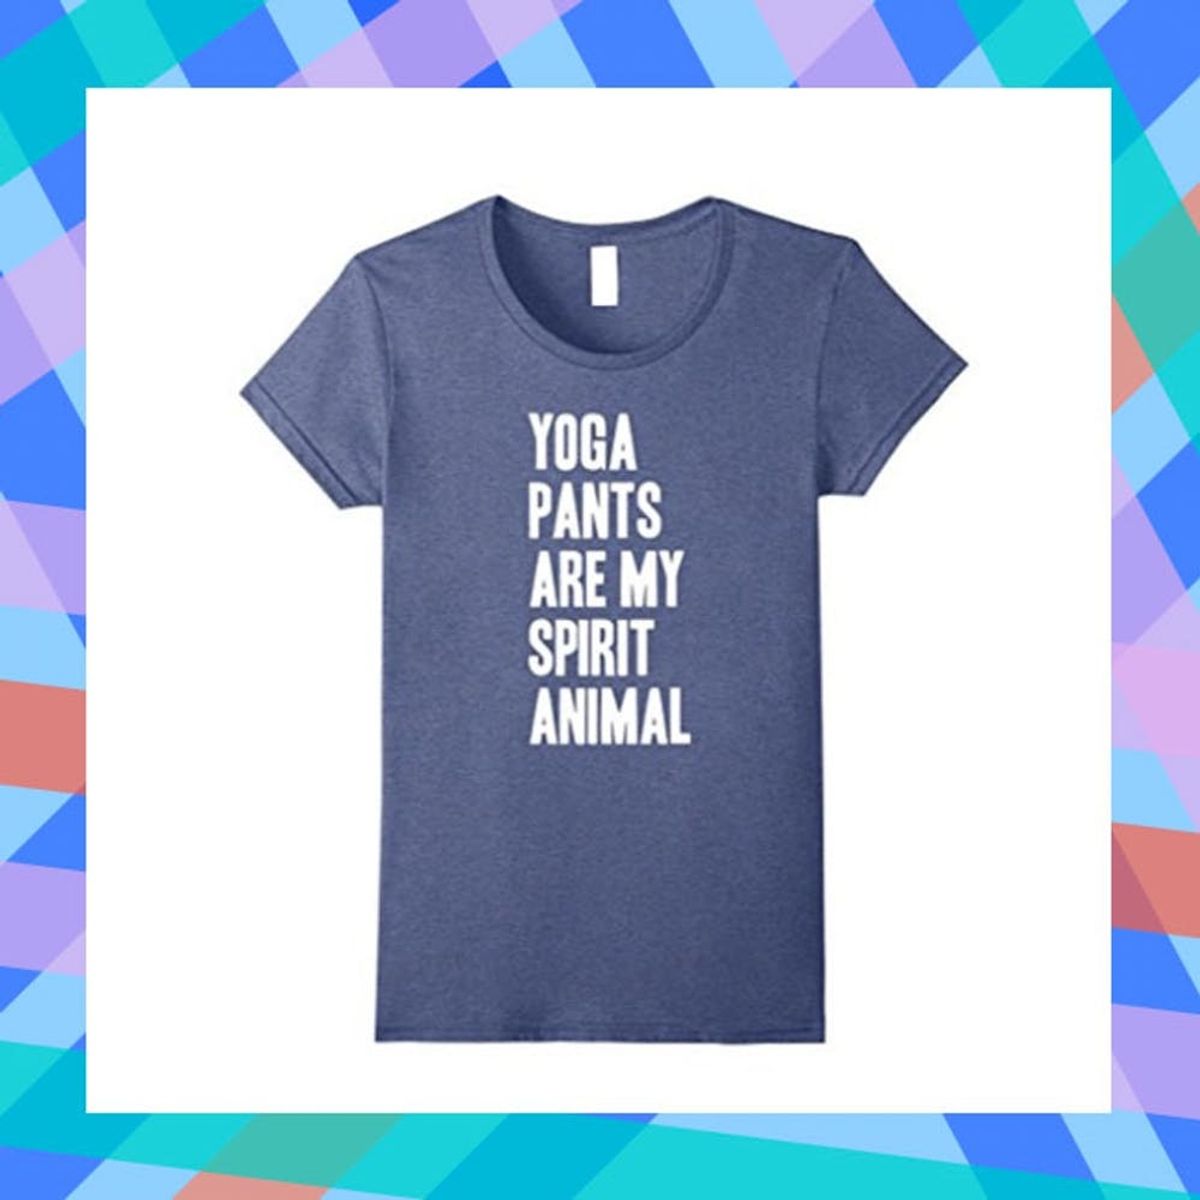 20 Relaxing Gift Ideas for Yoga Lovers